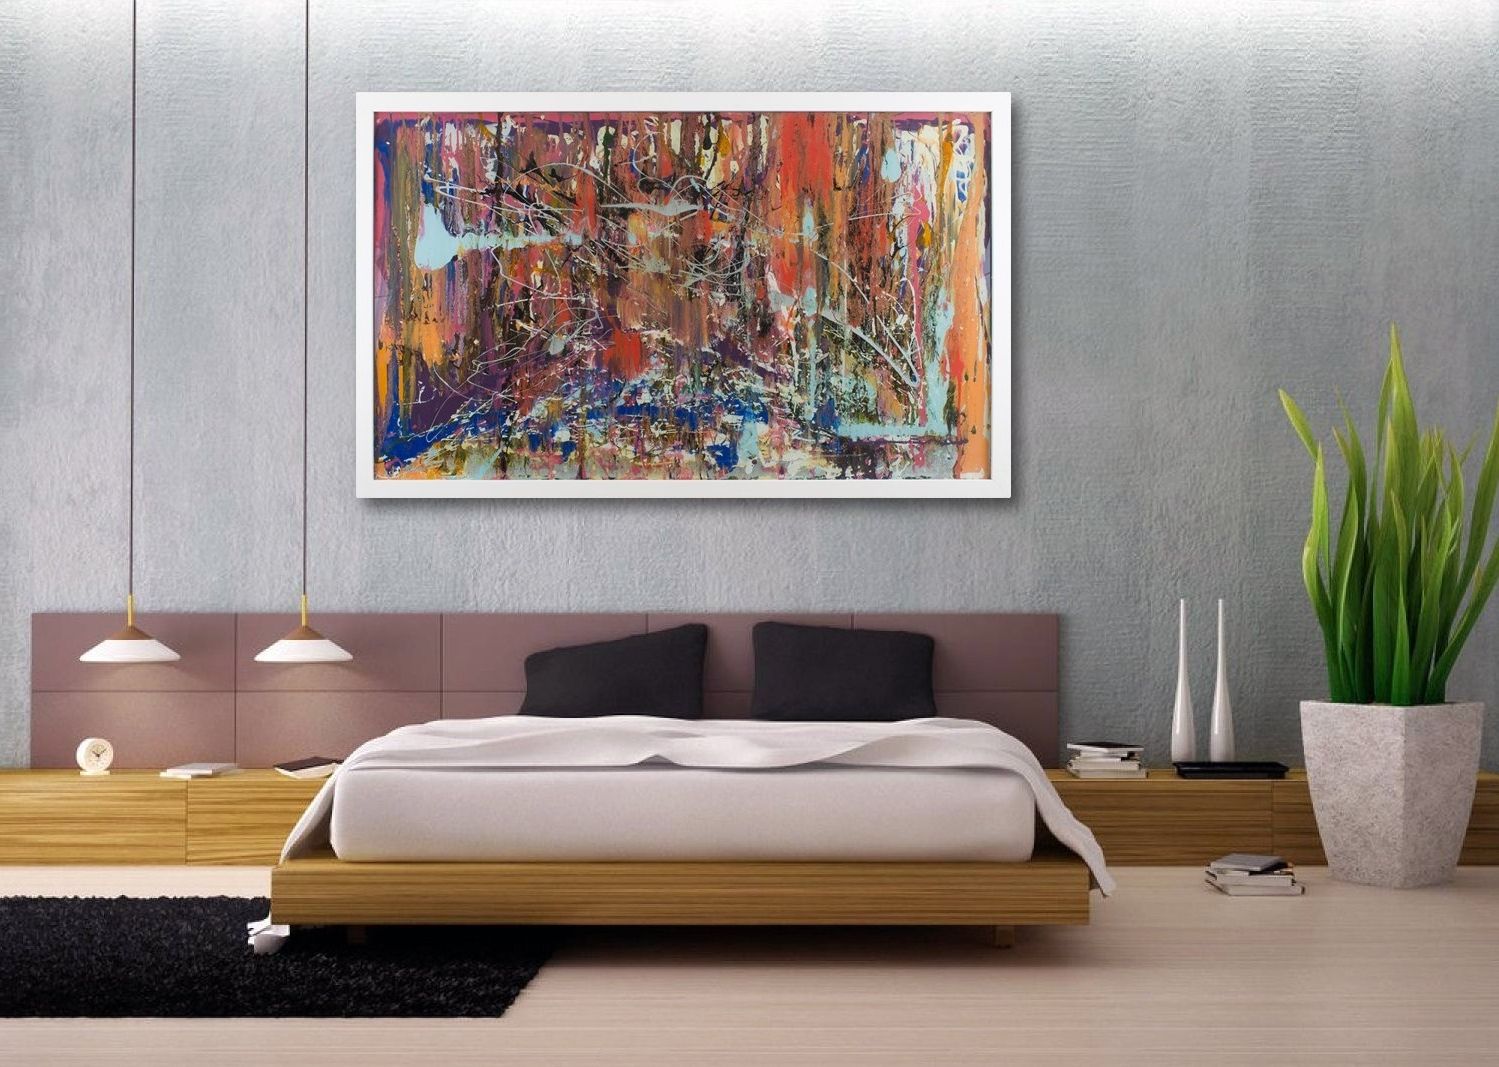 Most Popular Congenial Bedroom Piece Wall Abstract Large Oil Paintingsmulti Regarding Extra Large Canvas Abstract Wall Art (View 6 of 15)